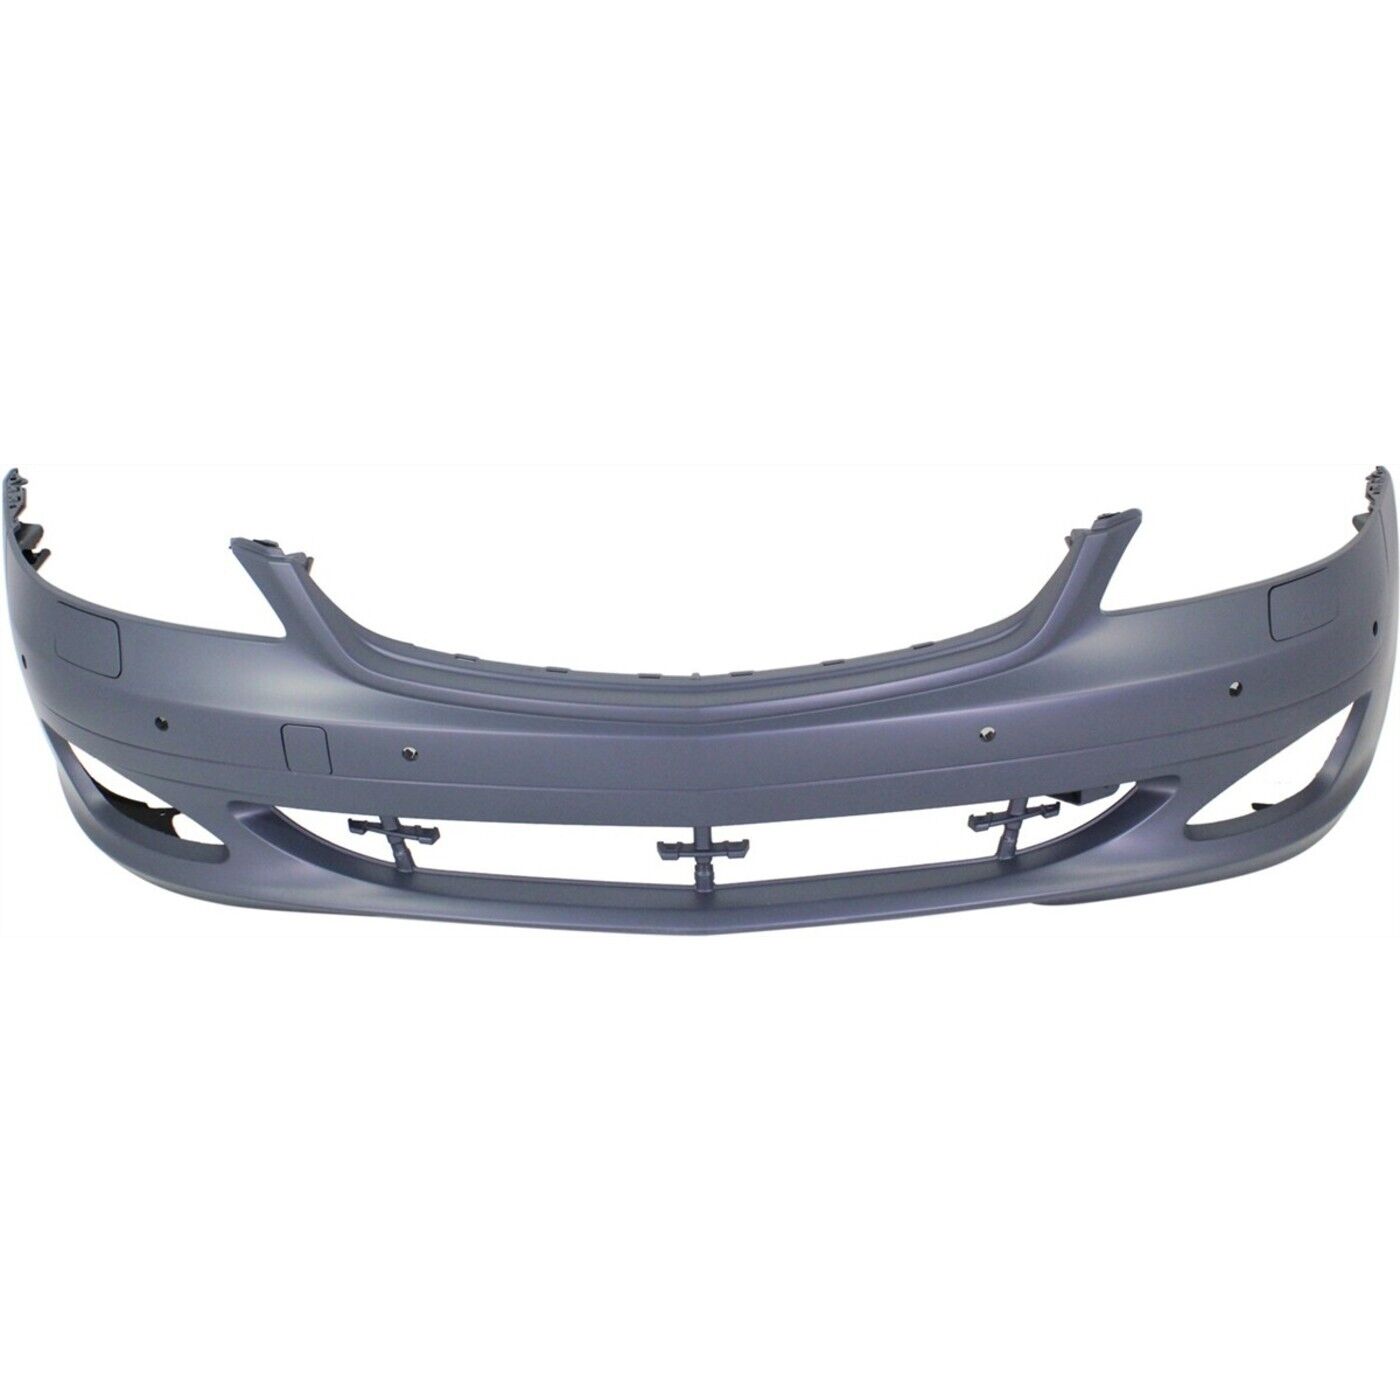 Front Bumper Cover For 2007-2011 M Benz S550 w/ fog lamp holes 07-13 S600 Primed